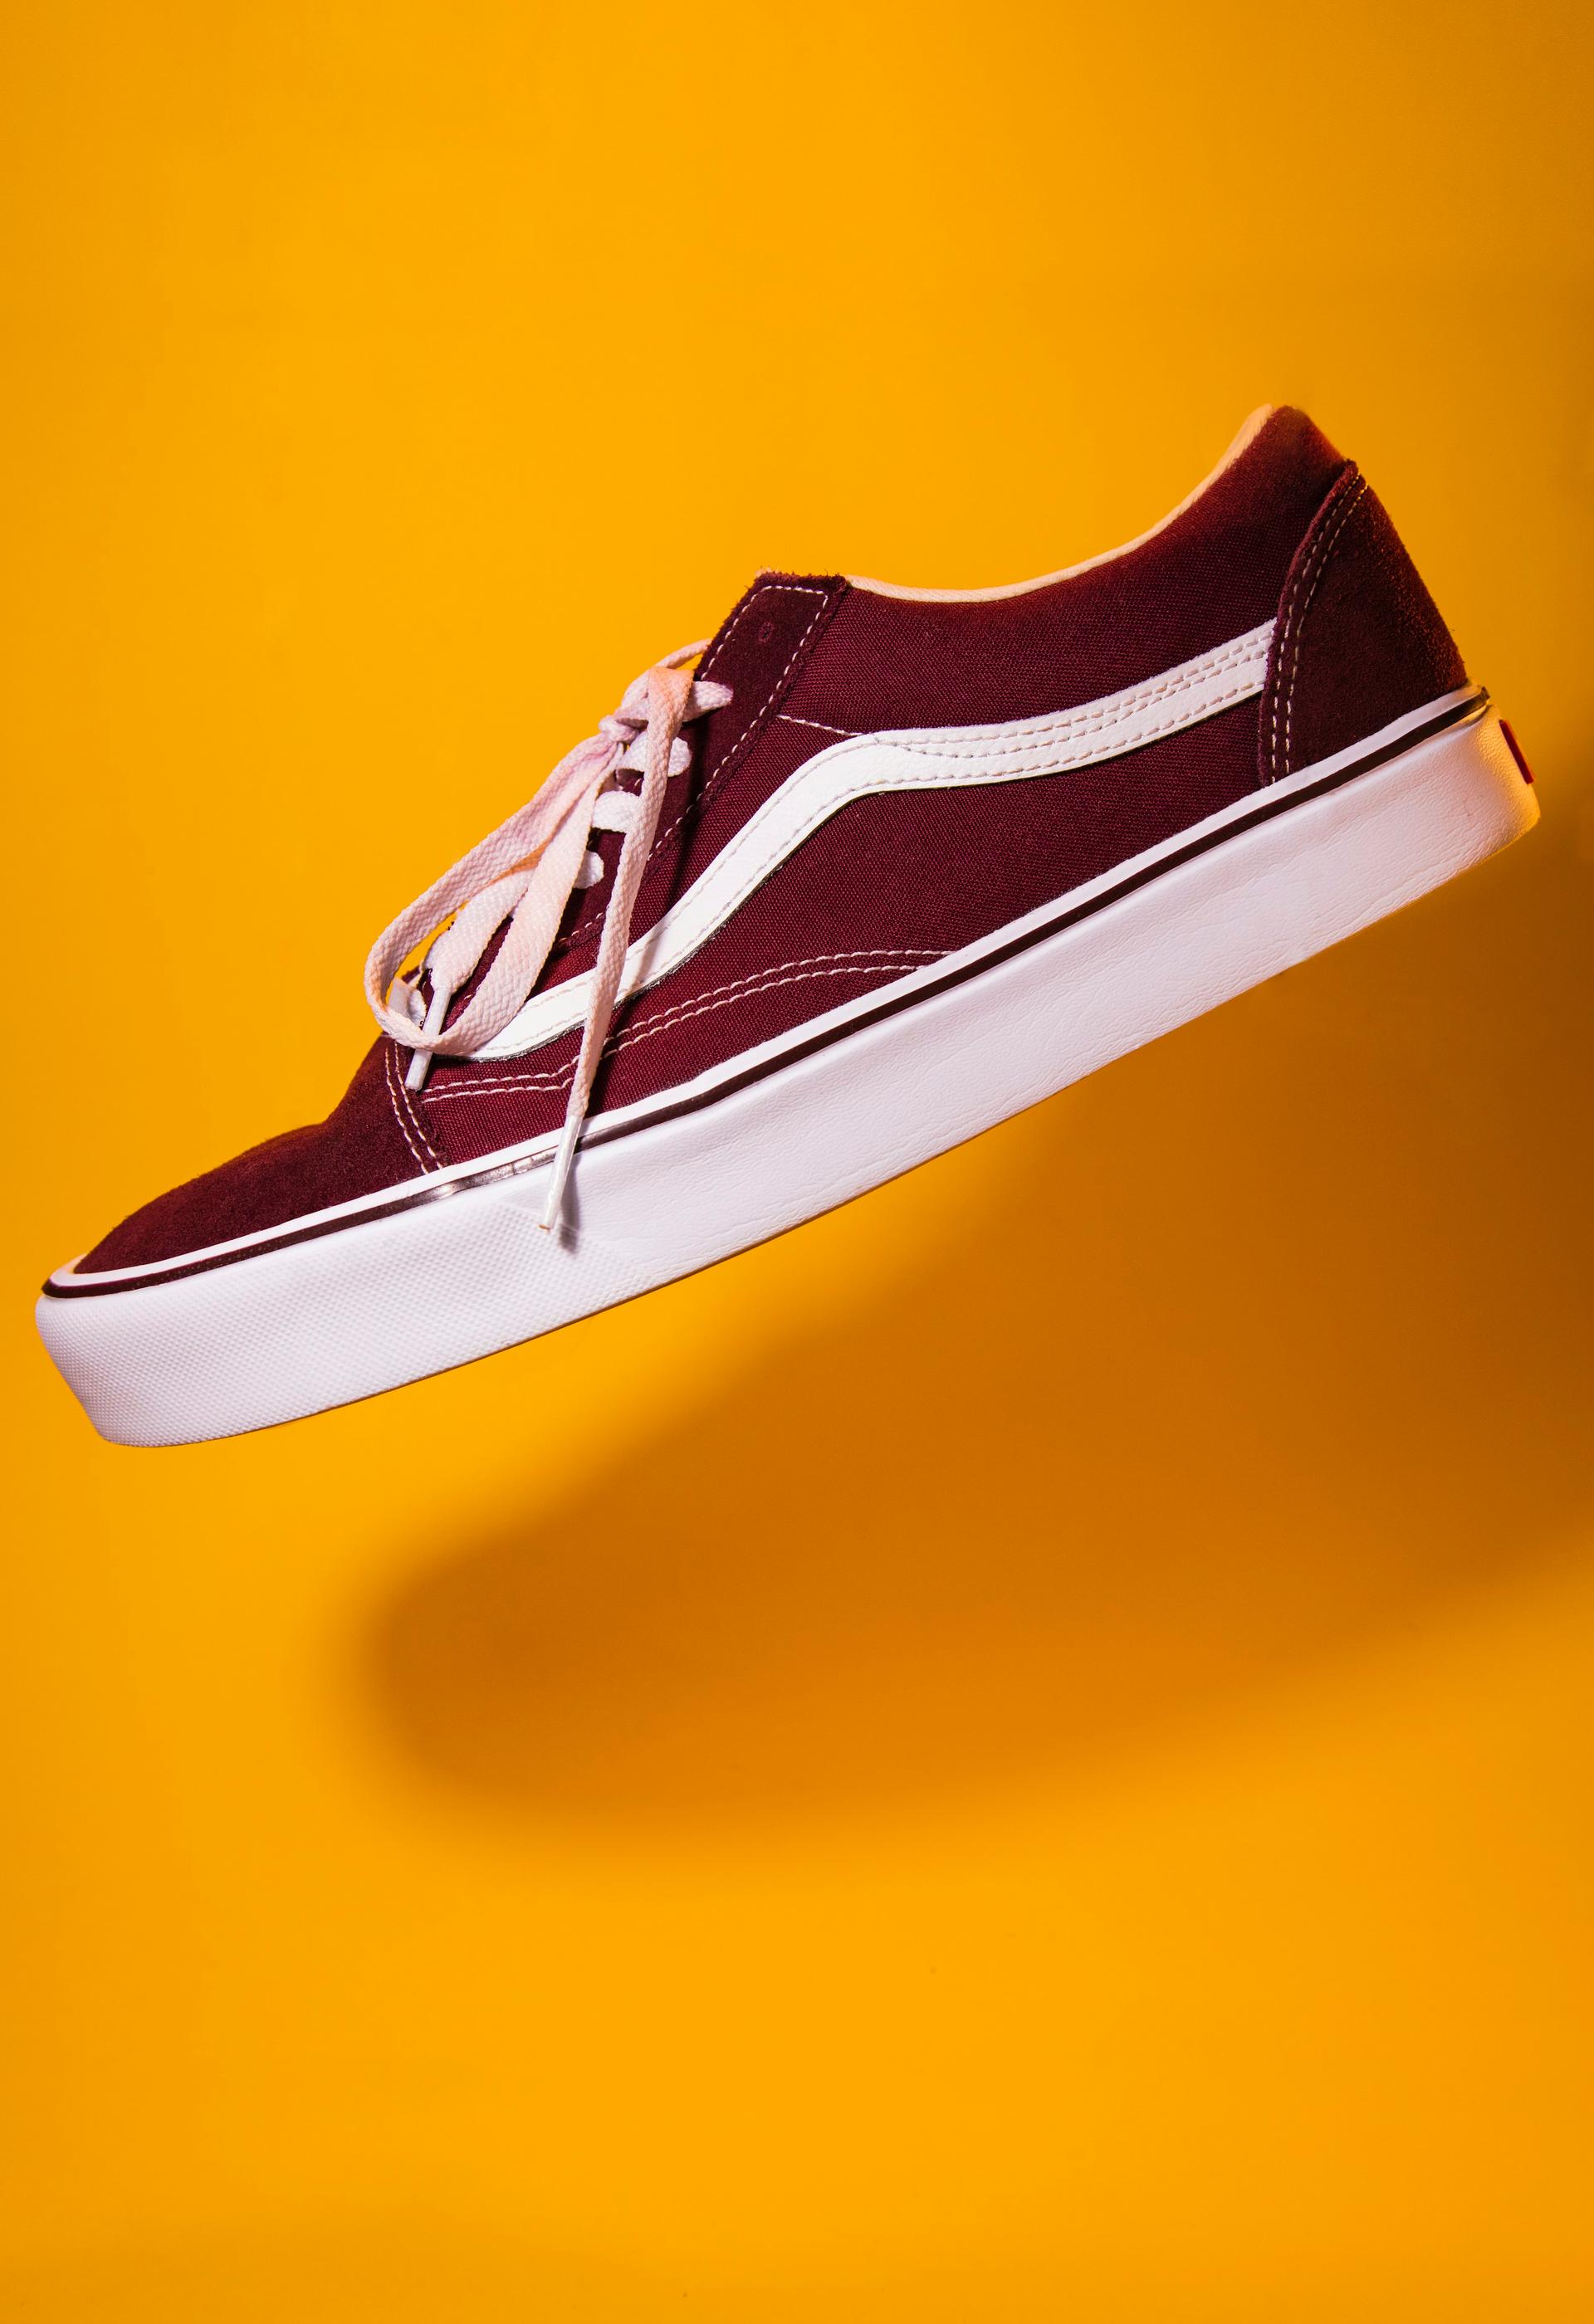 Vans Classic Red Canvas Sneakers - Step into Iconic Style